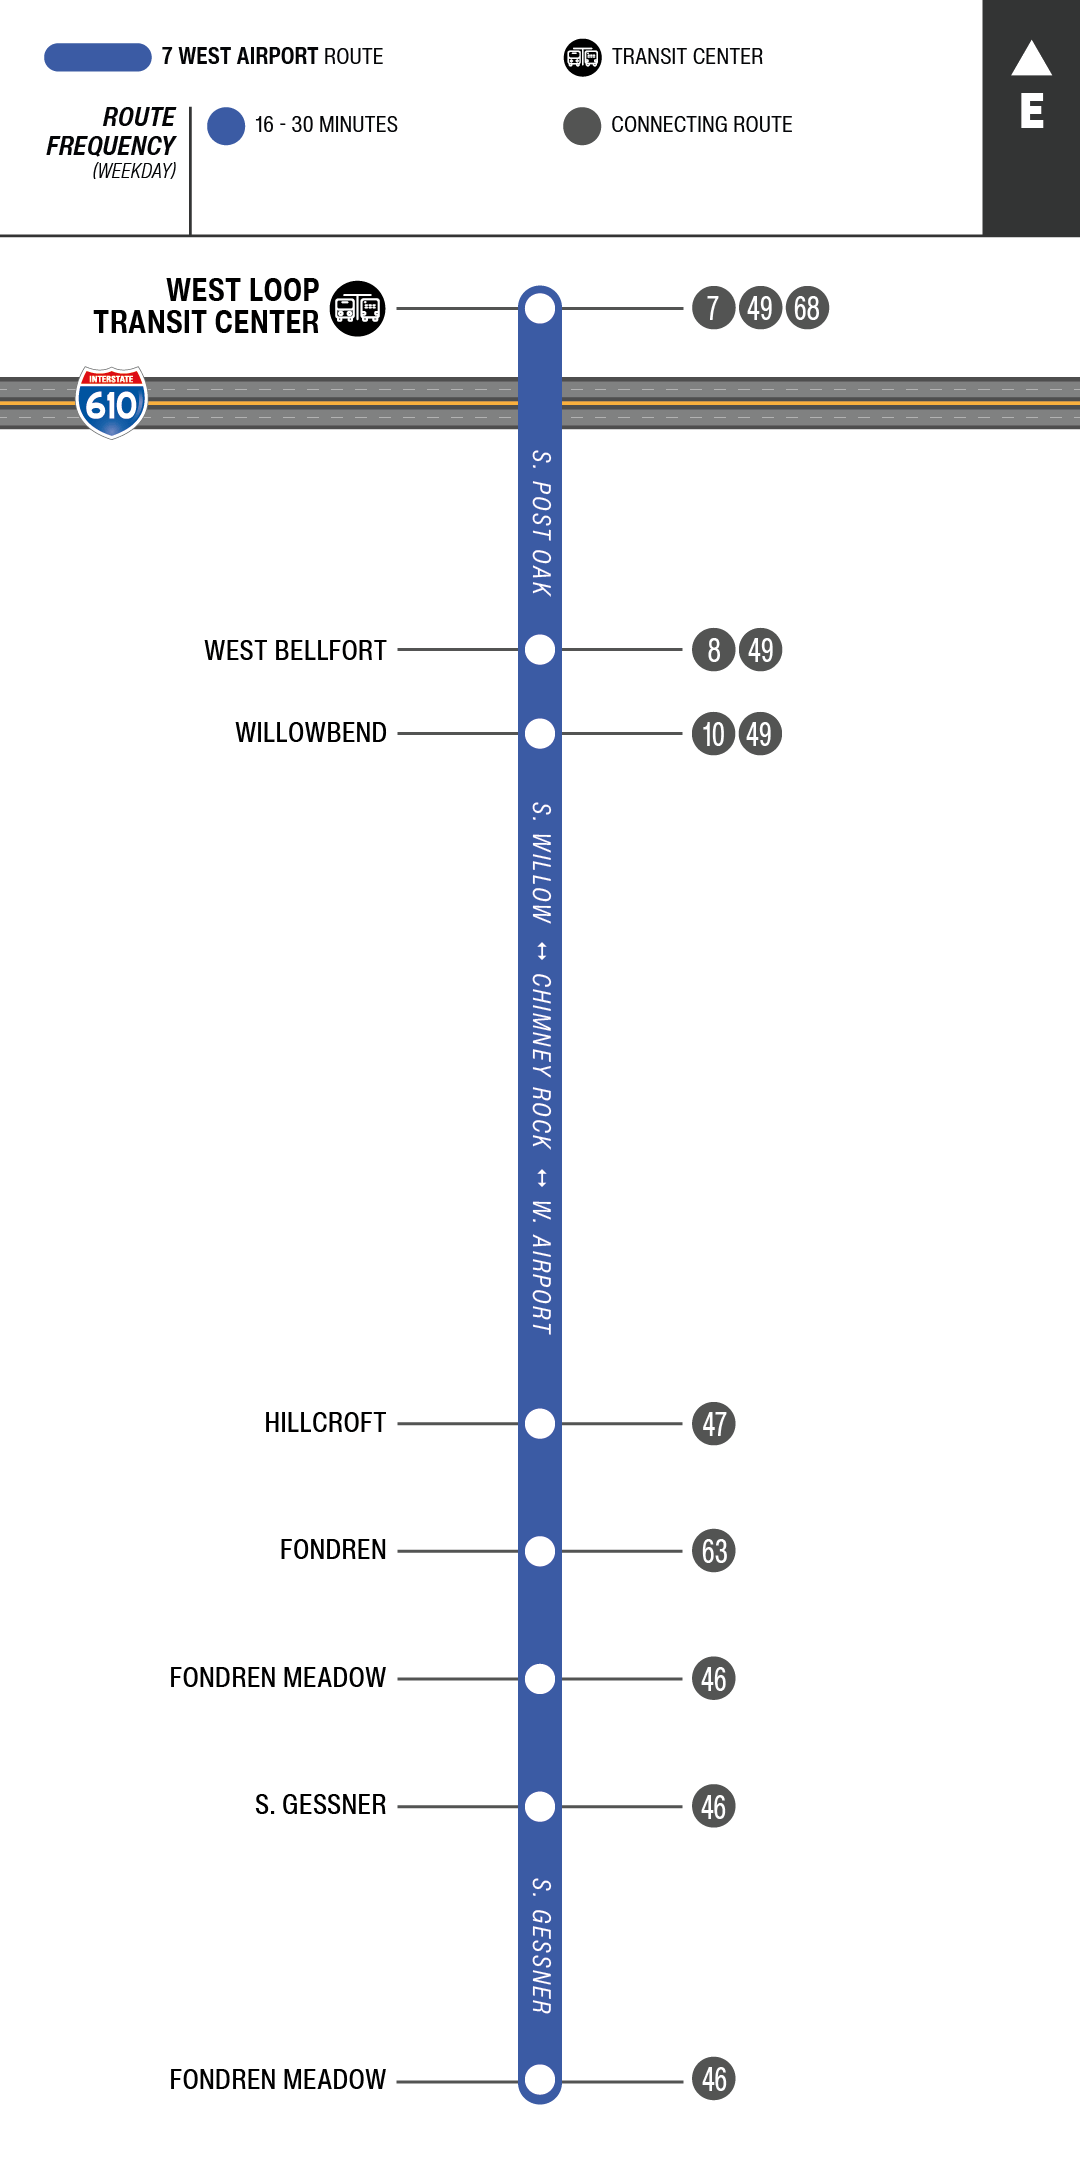 Route map for 7 West Airport bus